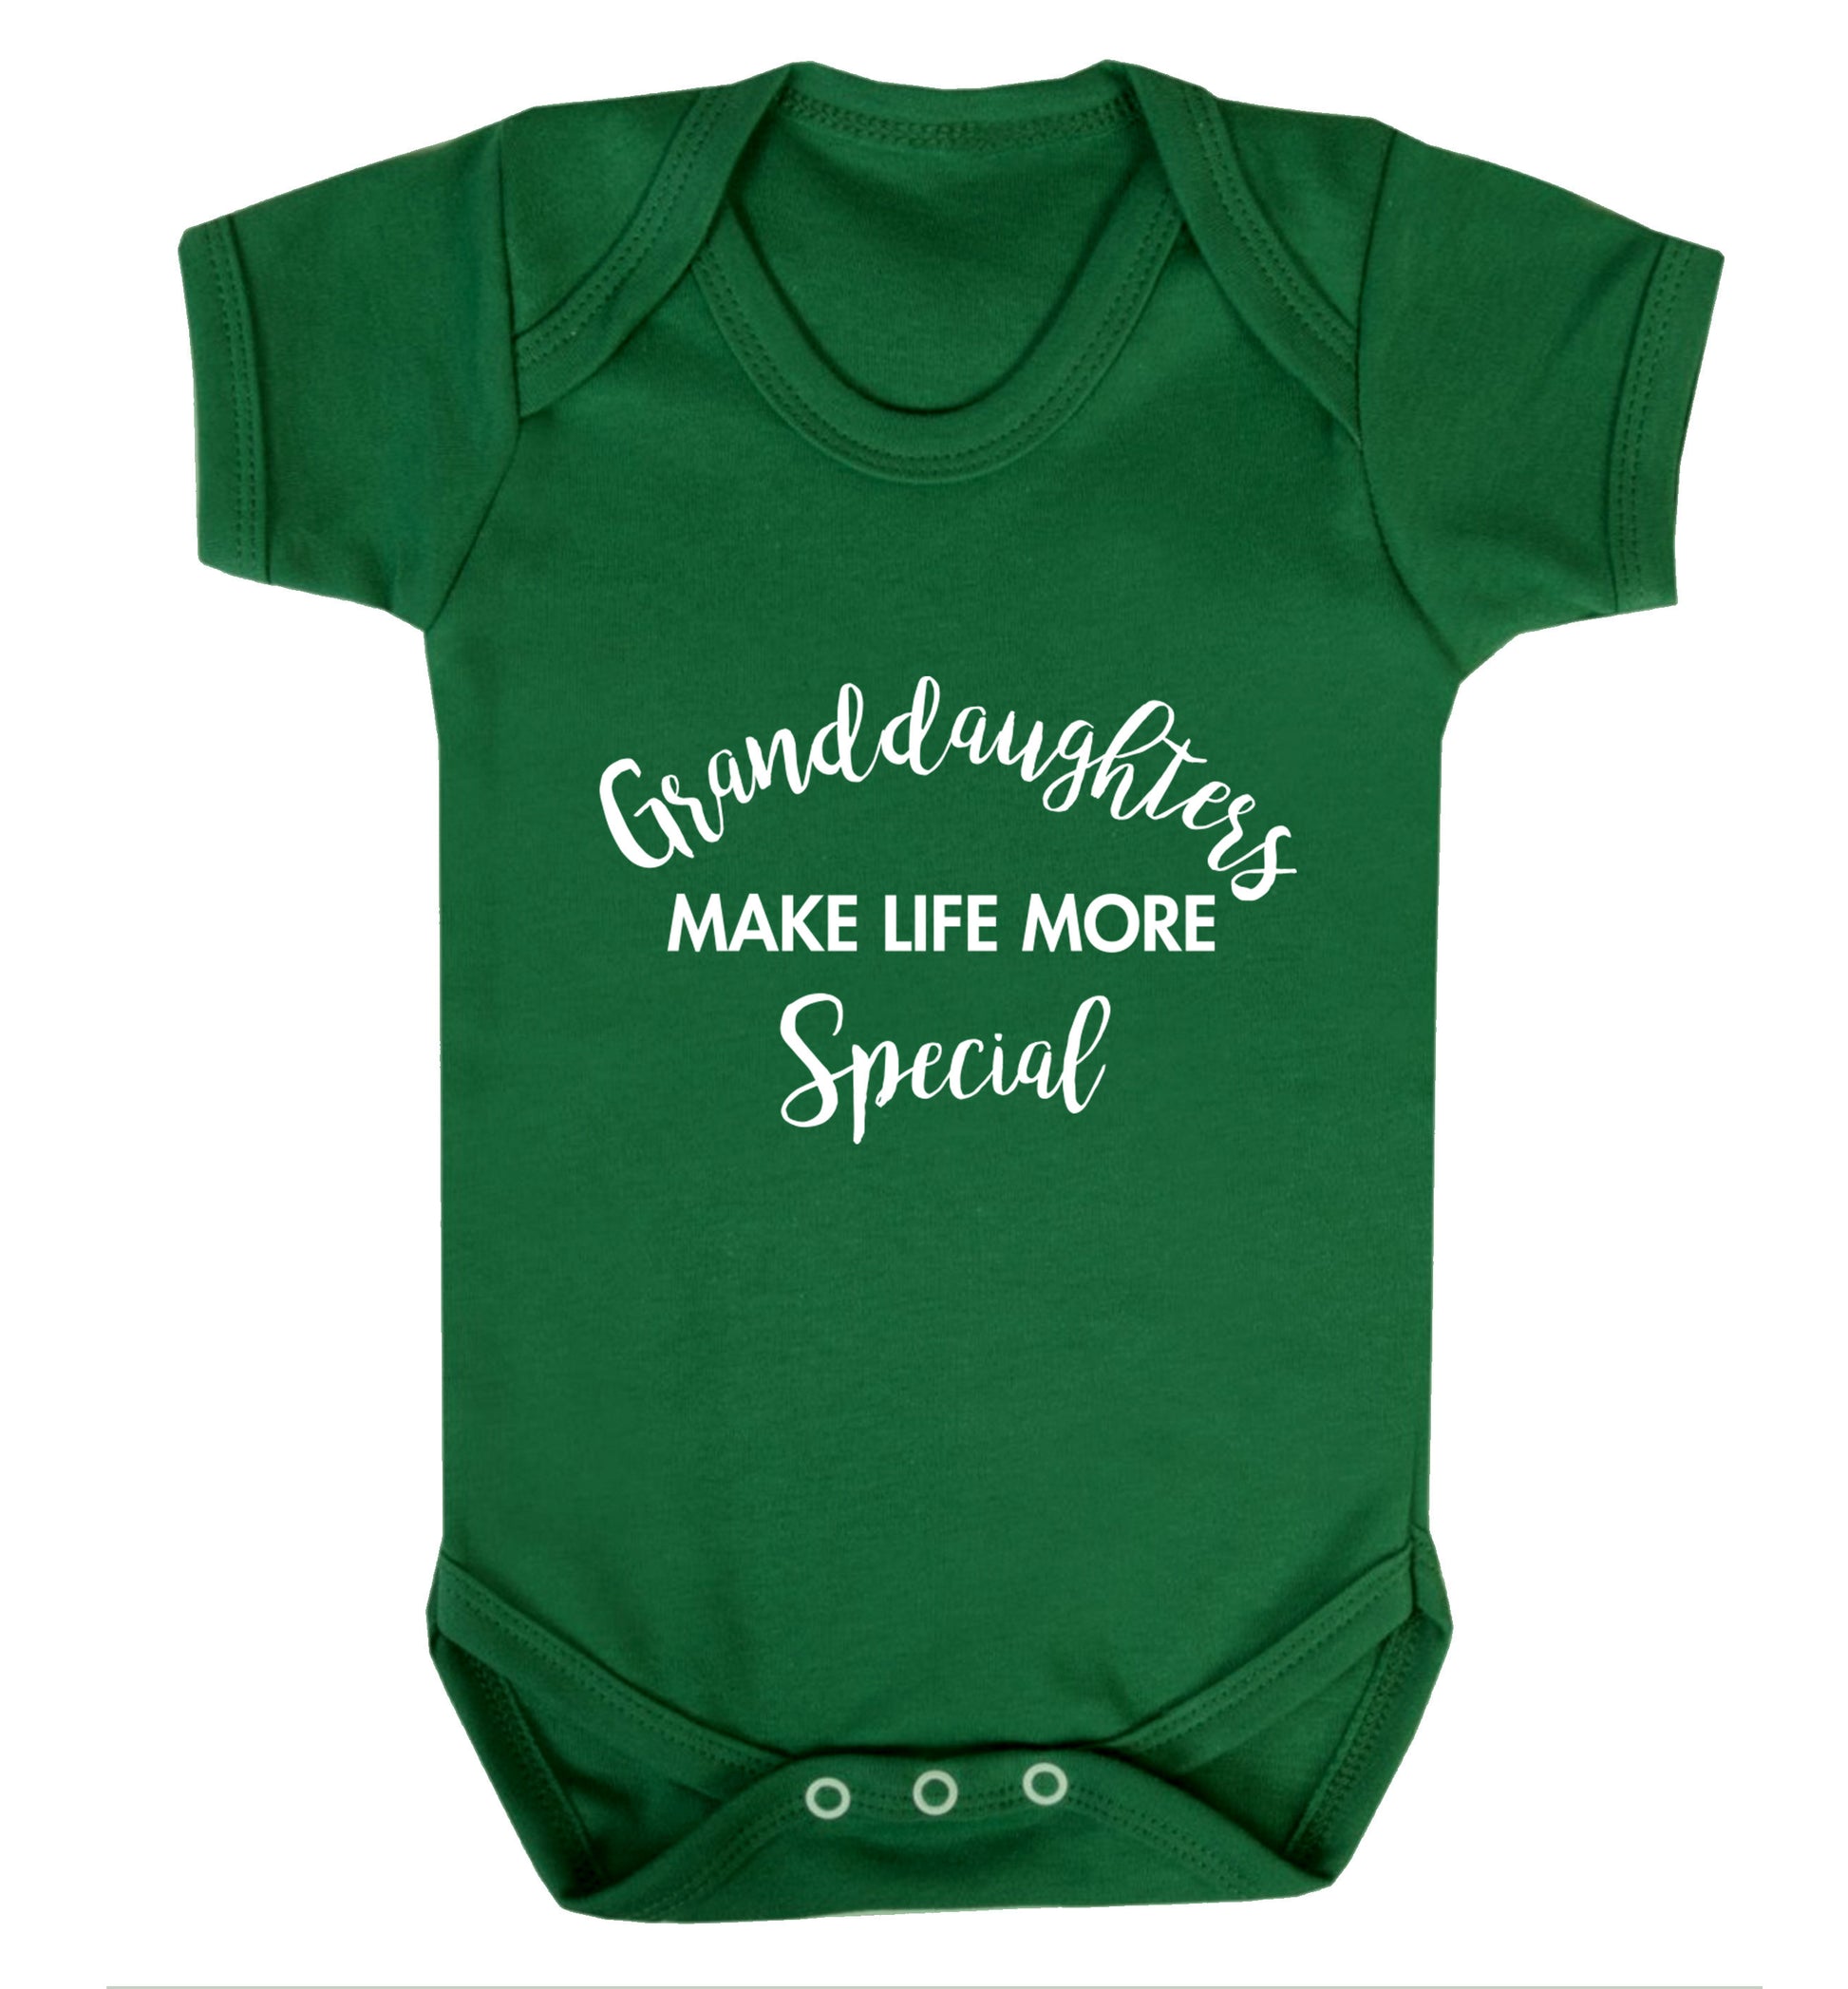 Granddaughters make life more special Baby Vest green 18-24 months